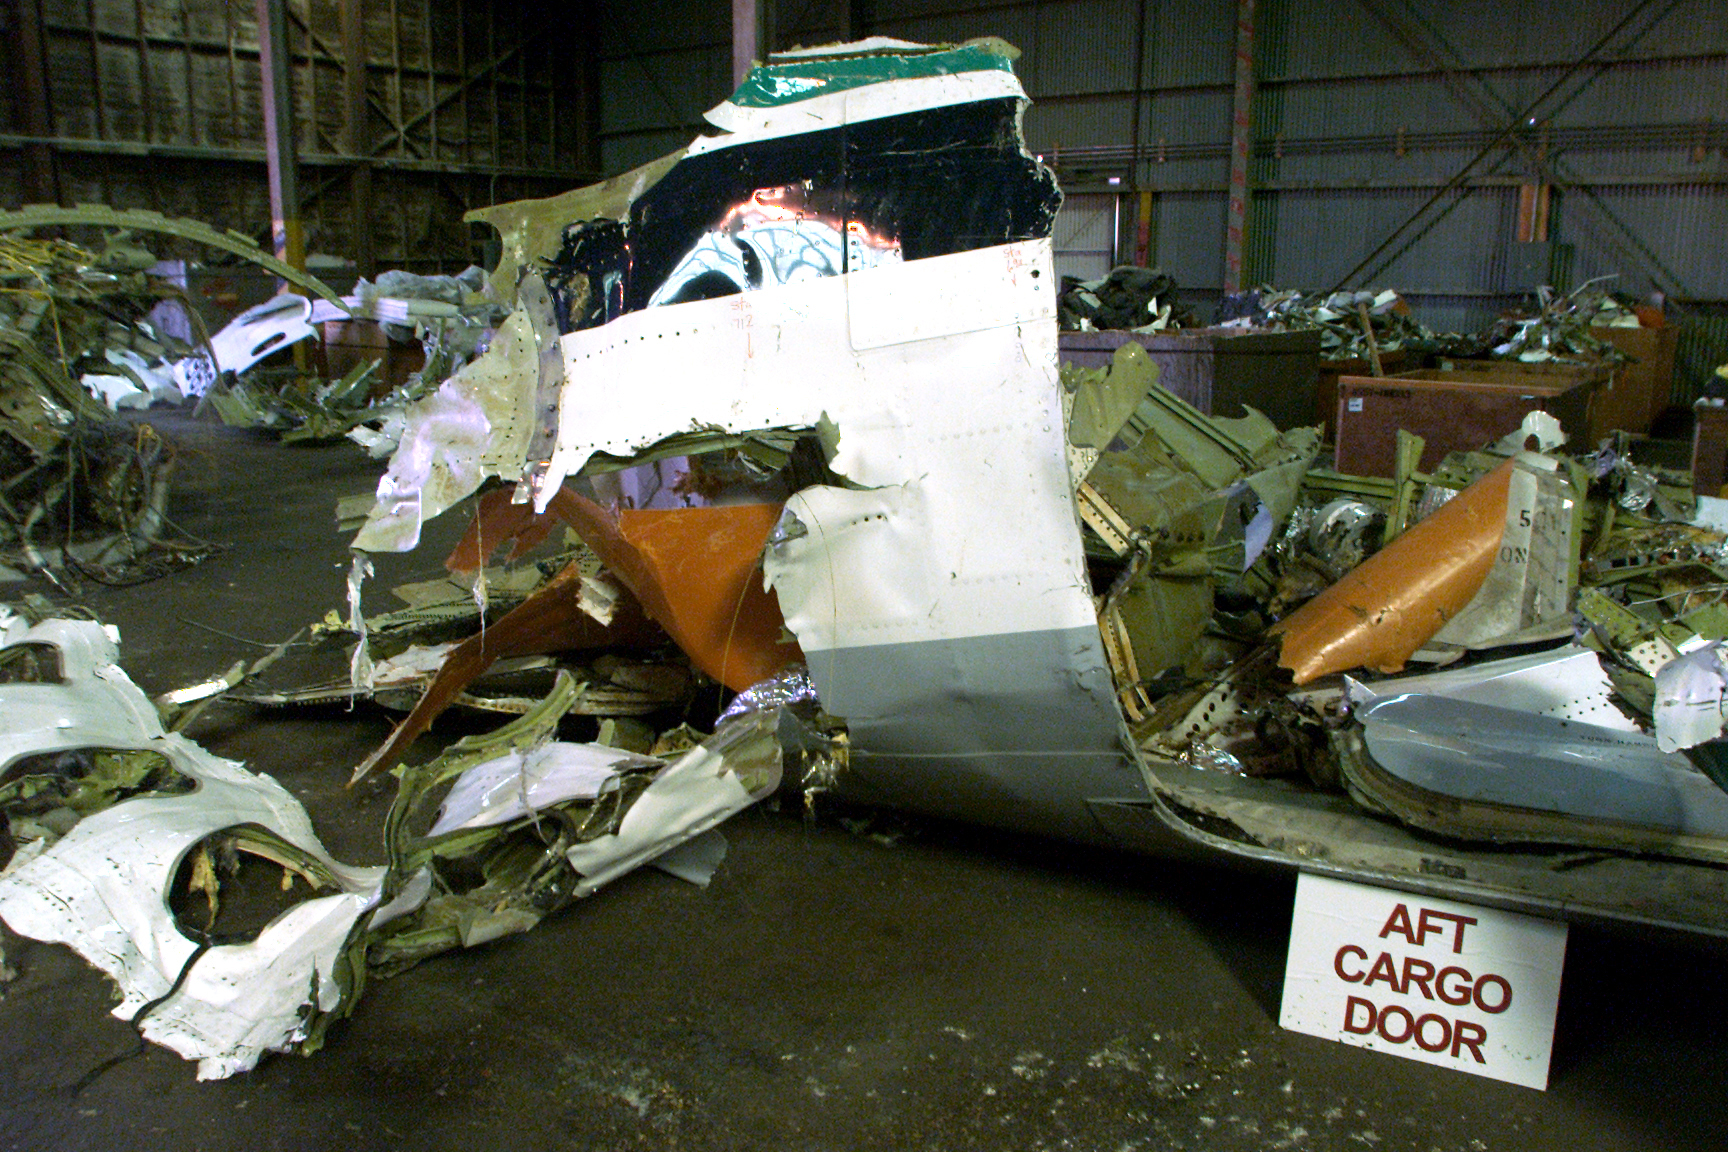 The cargo door section is shown at a warehouse at NBVC (Naval Base Ventura County) Port Hueneme which contains about 85% of the wreckage of the Alaska Airlines plane that crashed off Ventura County coast. | Source: Getty Images